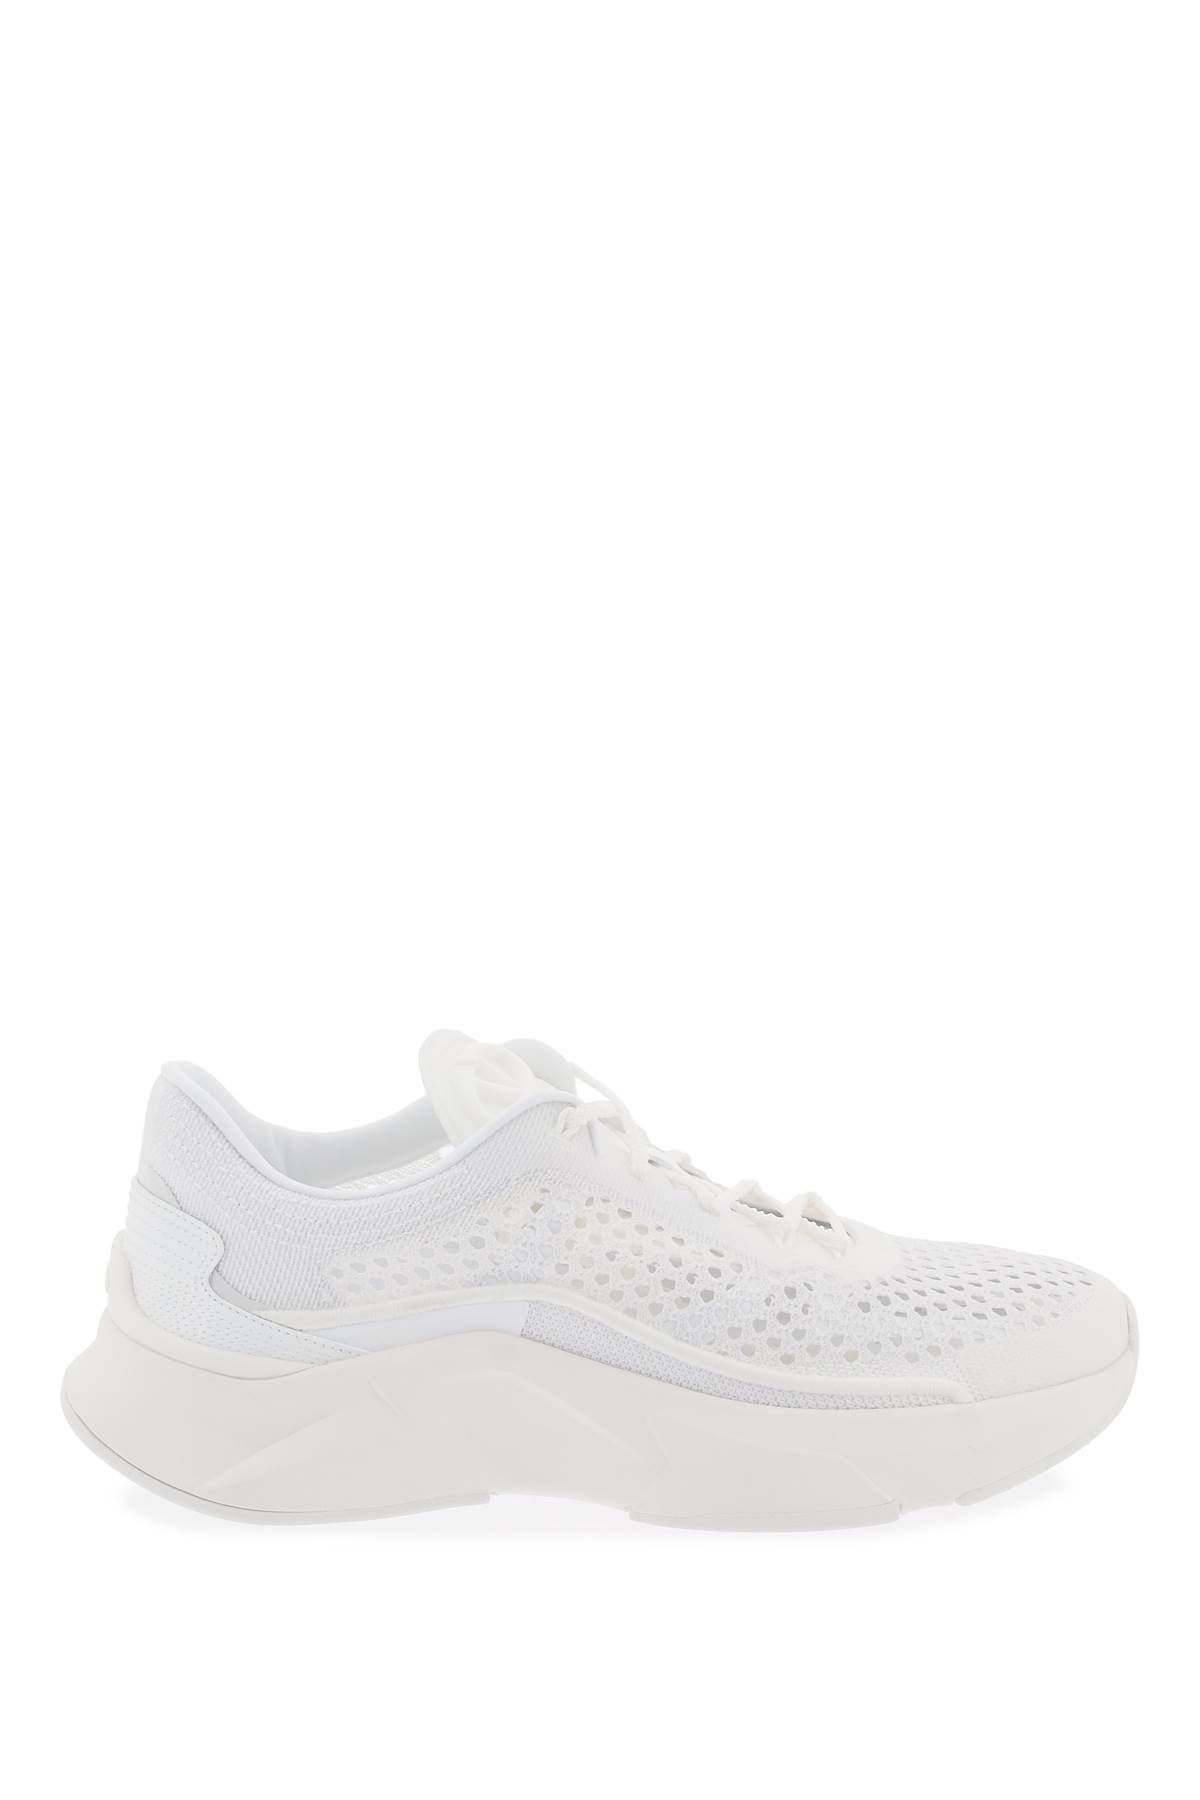 Shop Valentino "true Actress Mesh Sneakers For In White